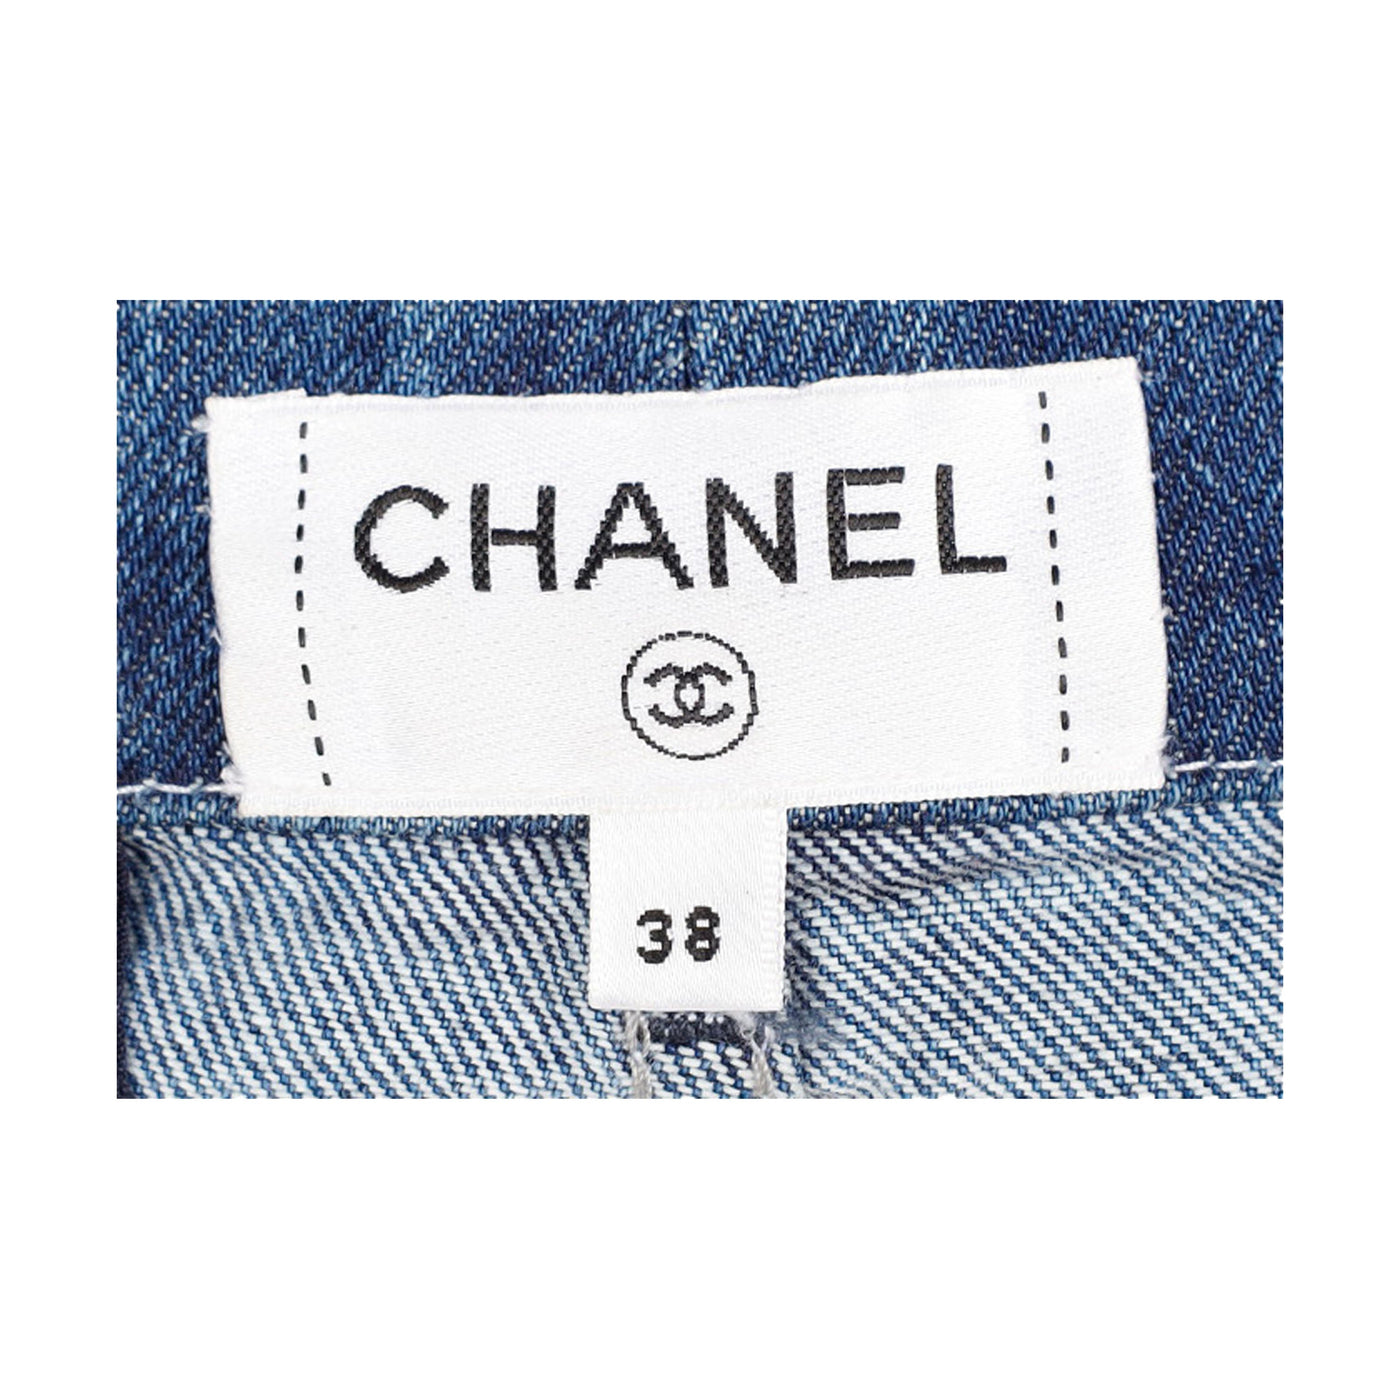 Secondhand Chanel High-waisted Denim Pants